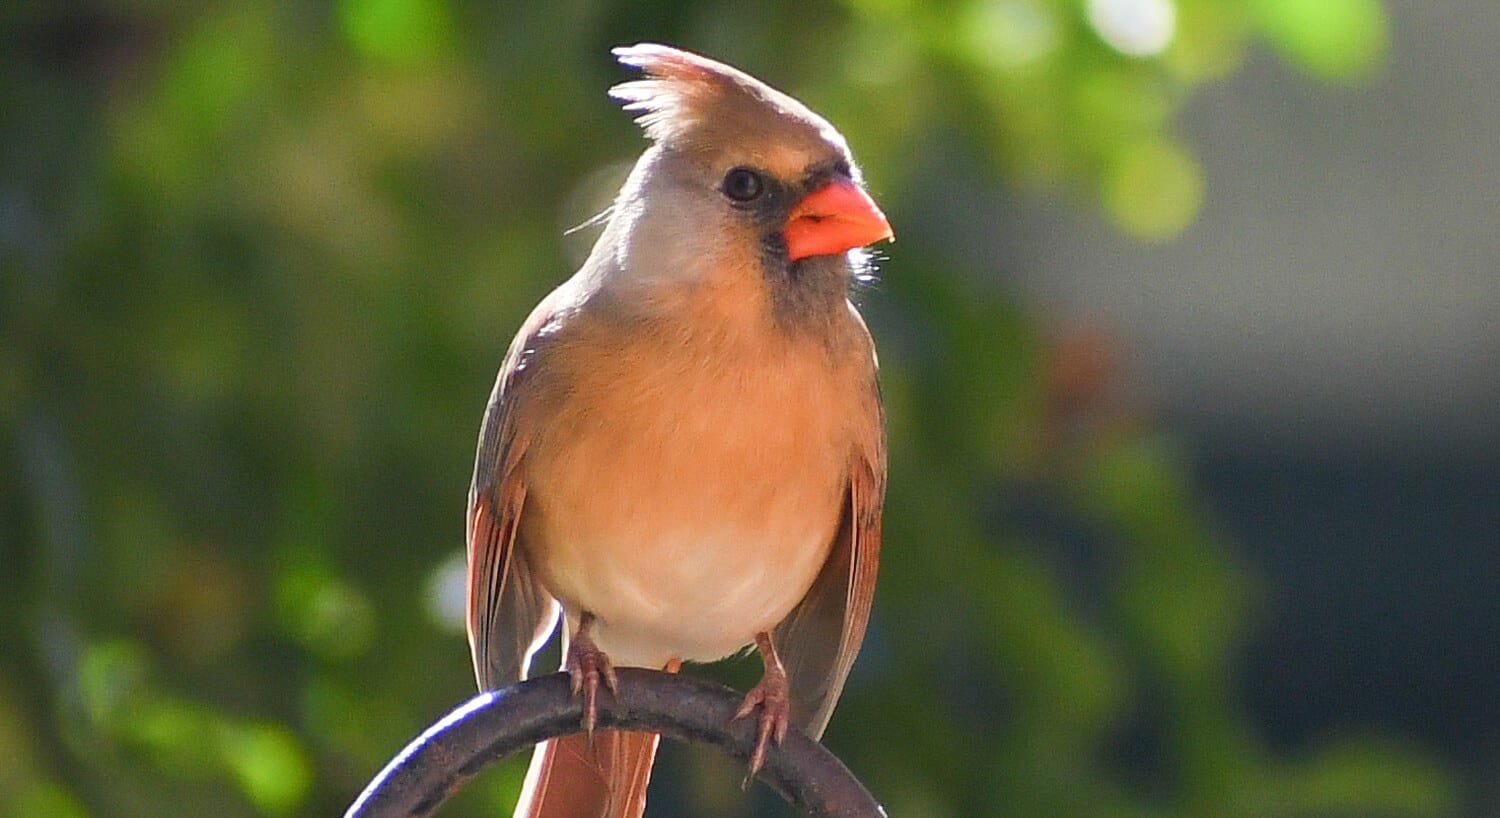 Up close view of a bird with peach and white feathers and orange beak perched on a curved metal fence post